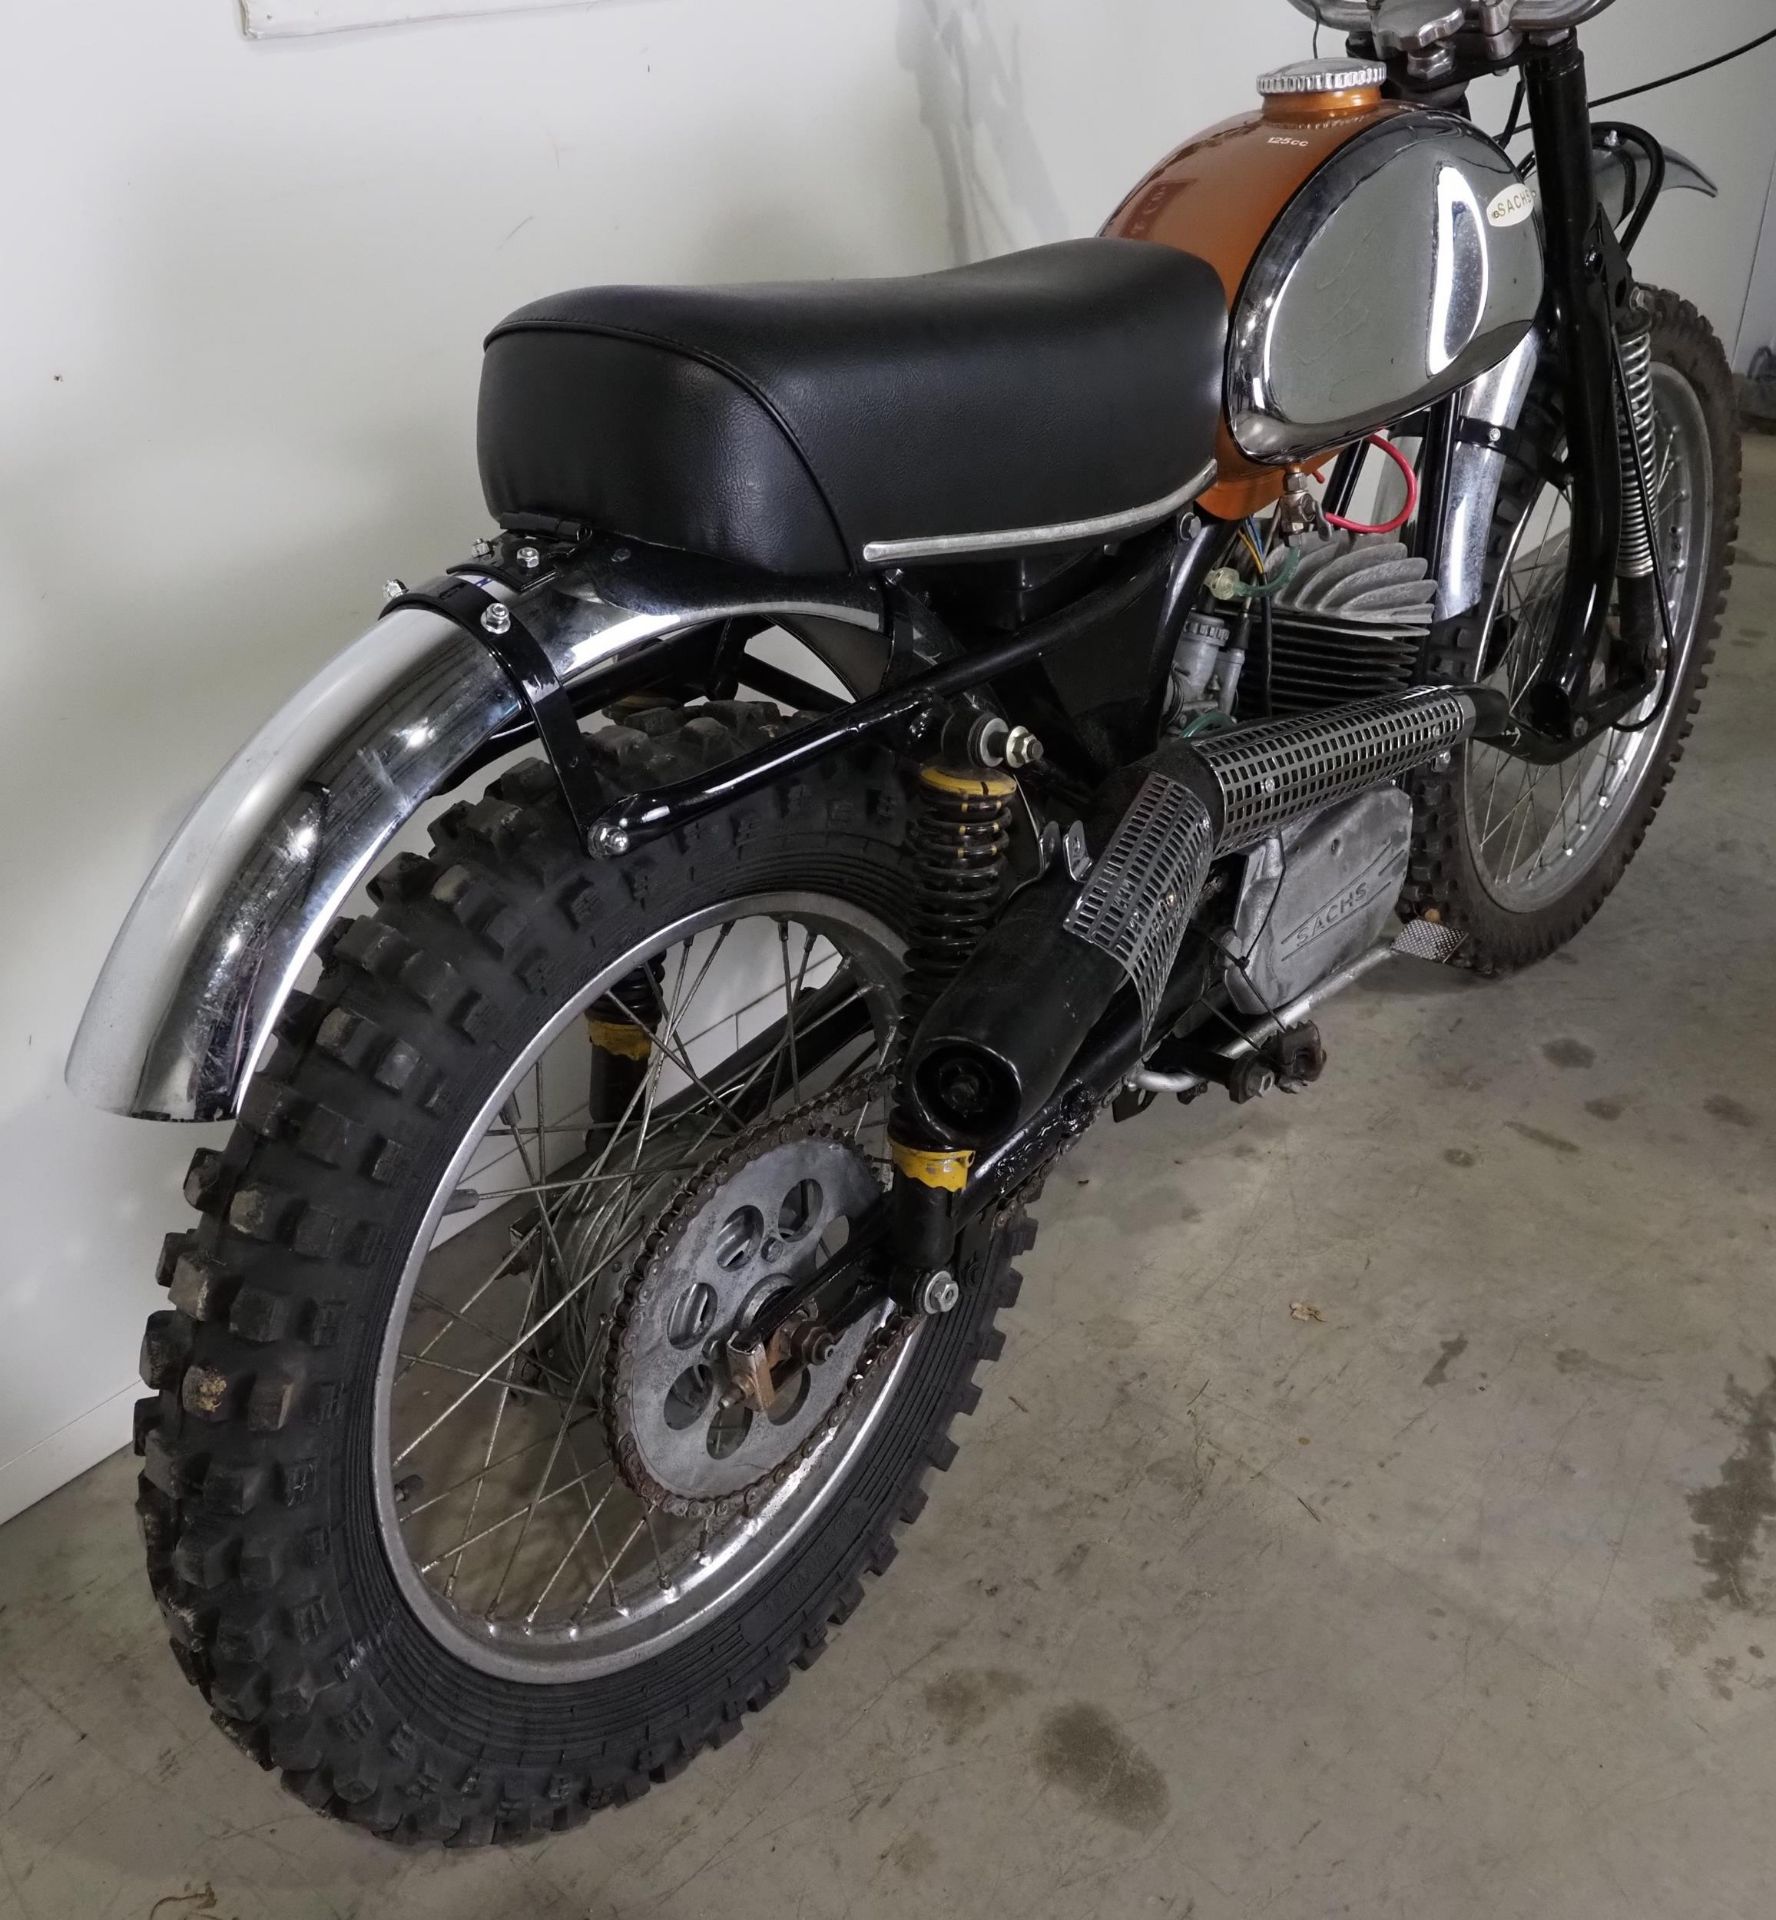 Sachs type 427 motocross bike. 1970. Frame No. 427-003950 Engine No. 57636666 Runs but requires - Image 6 of 7